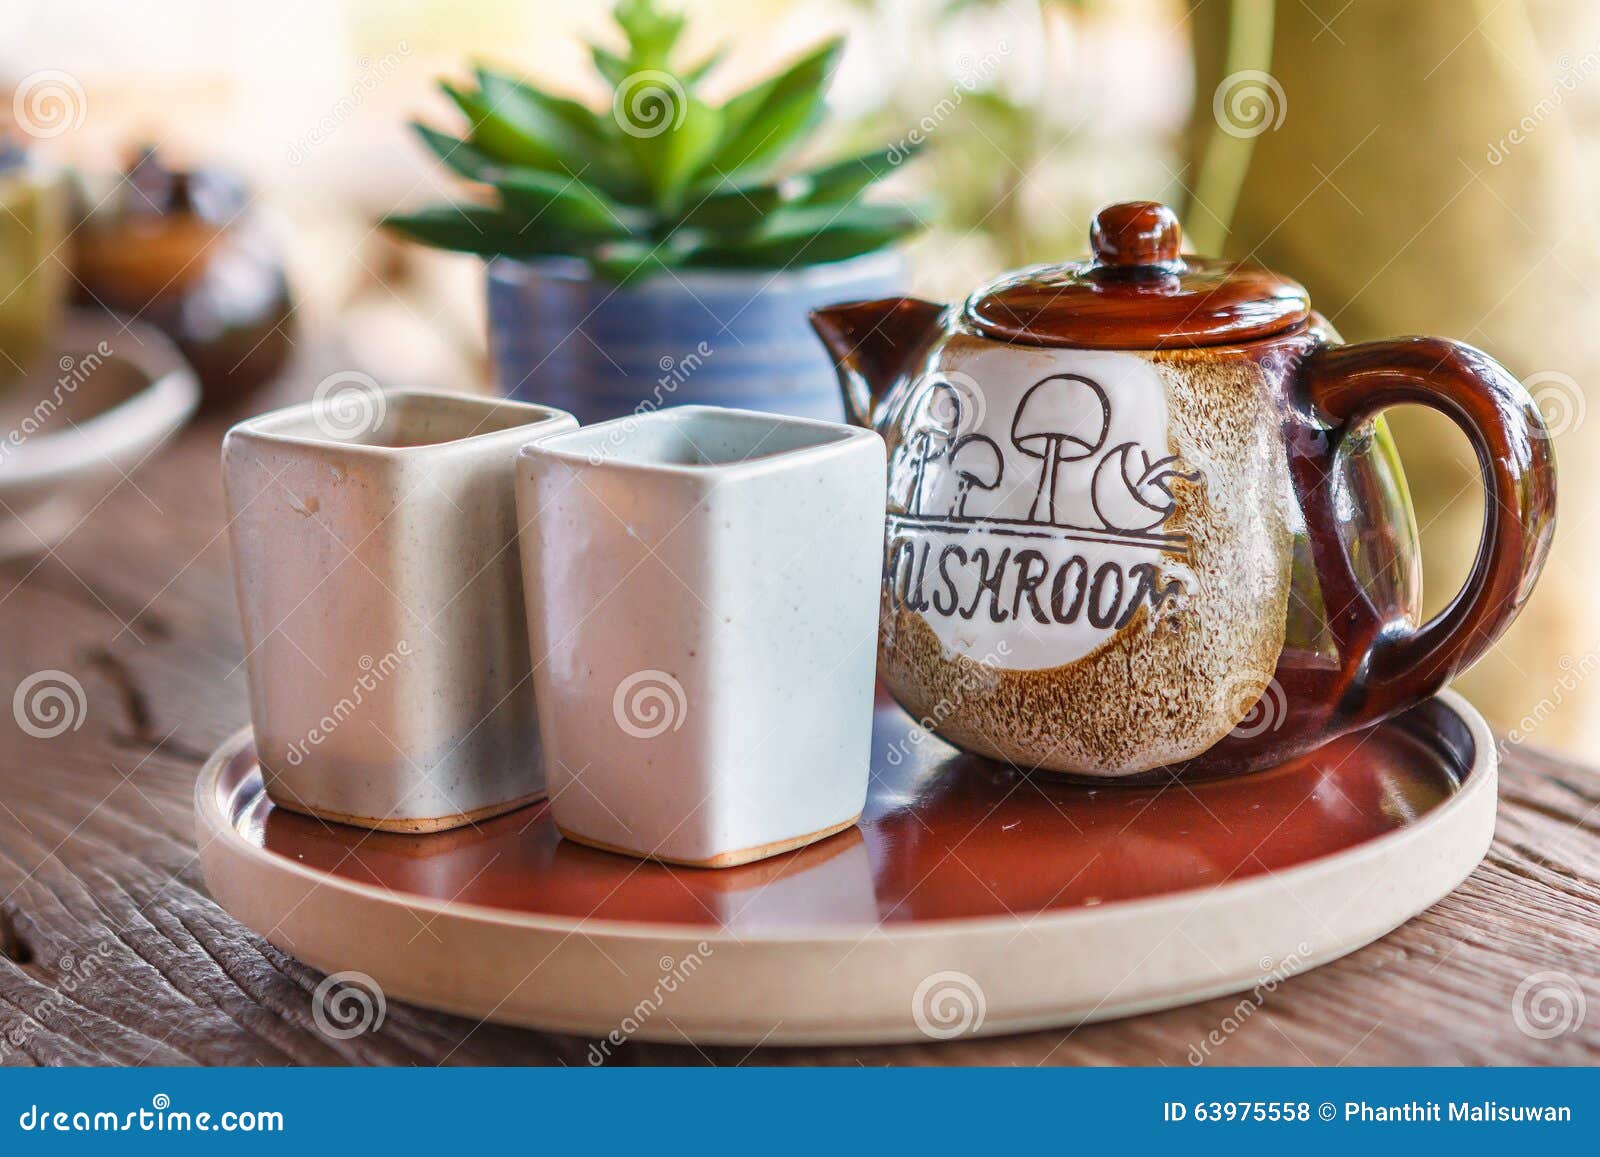 Mug and a Jug in Plate on a Wooden Table Stock Photo - Image of fresh ...